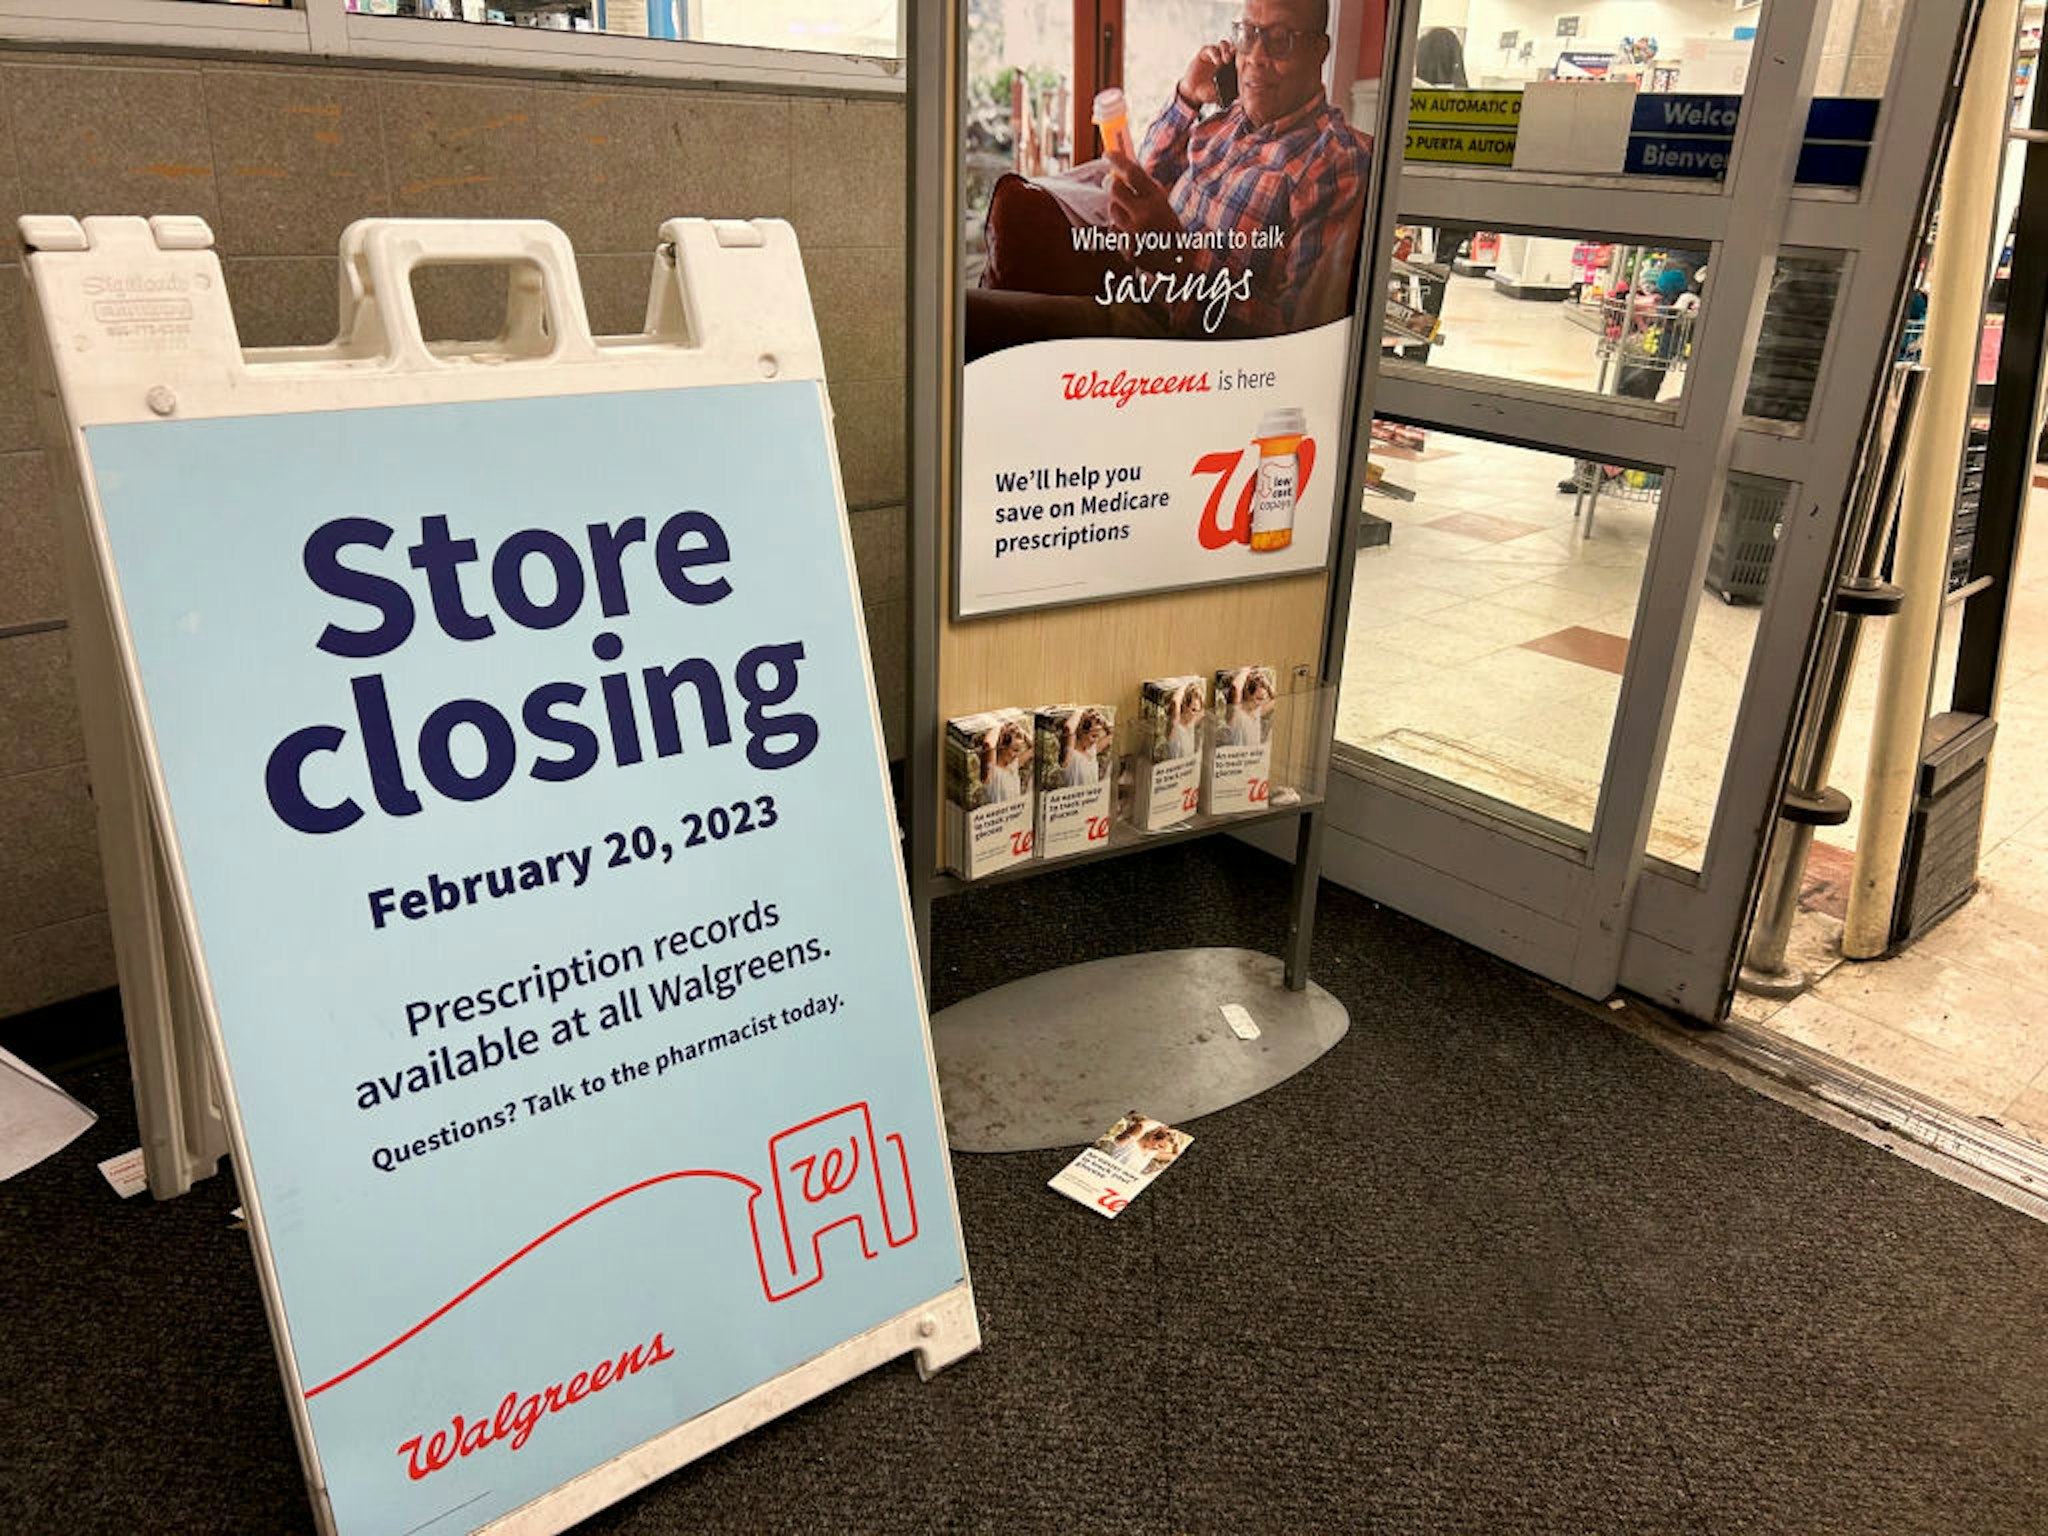 Walgreens Pharmacy and store closing sign at entrance, Queens, New York. (Photo by: Lindsey Nicholson/UCG/Universal Images Group via Getty Images)